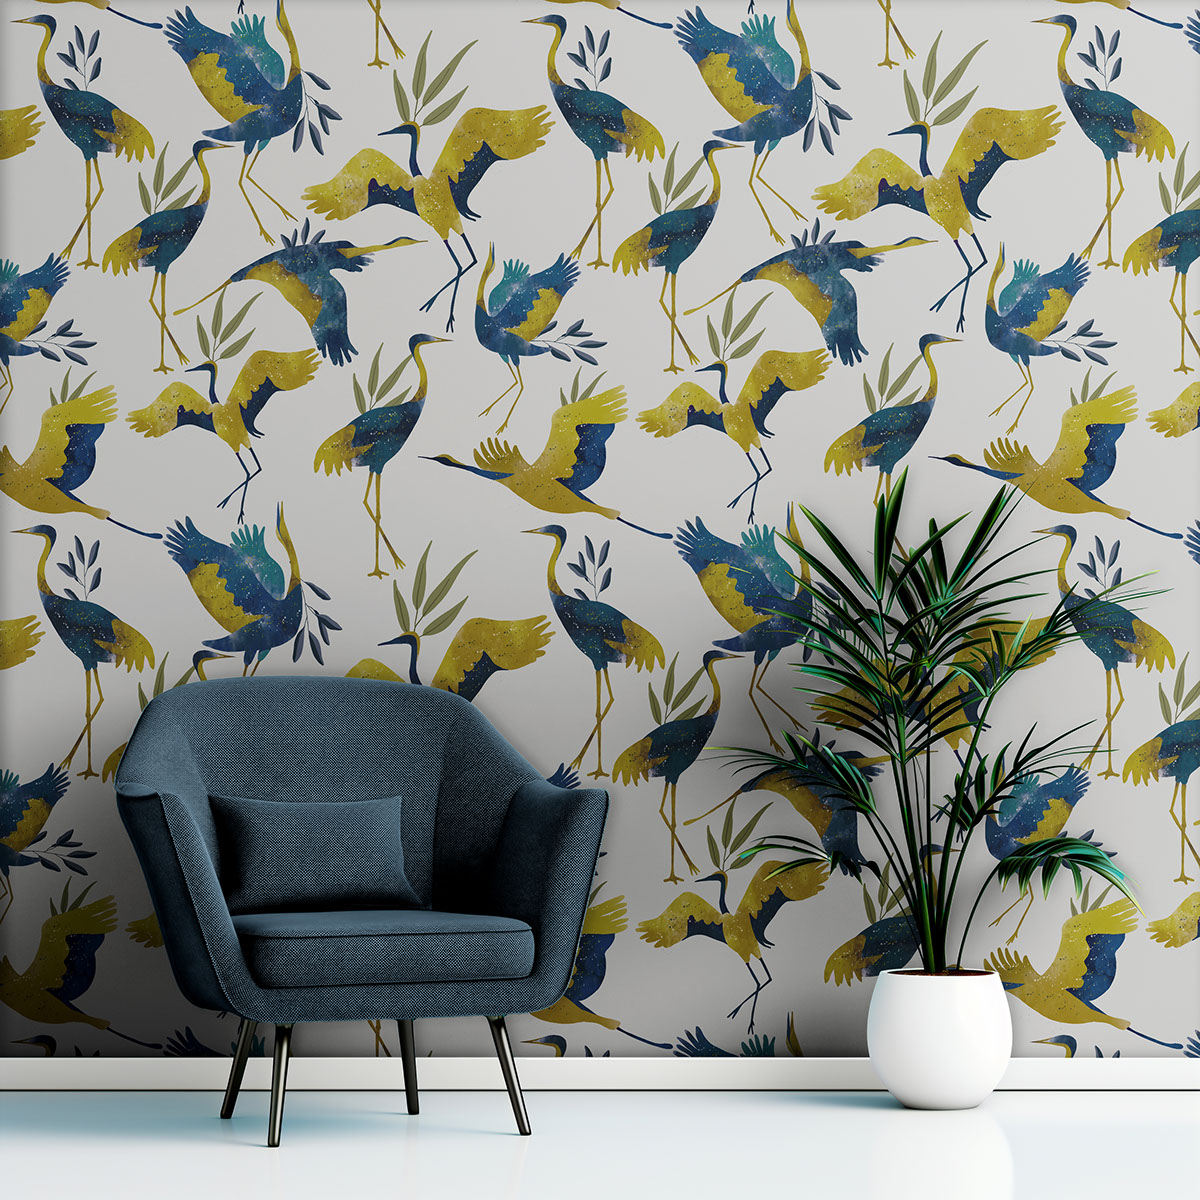 Birds Dream seamless pattern 12x12 inches rendition image